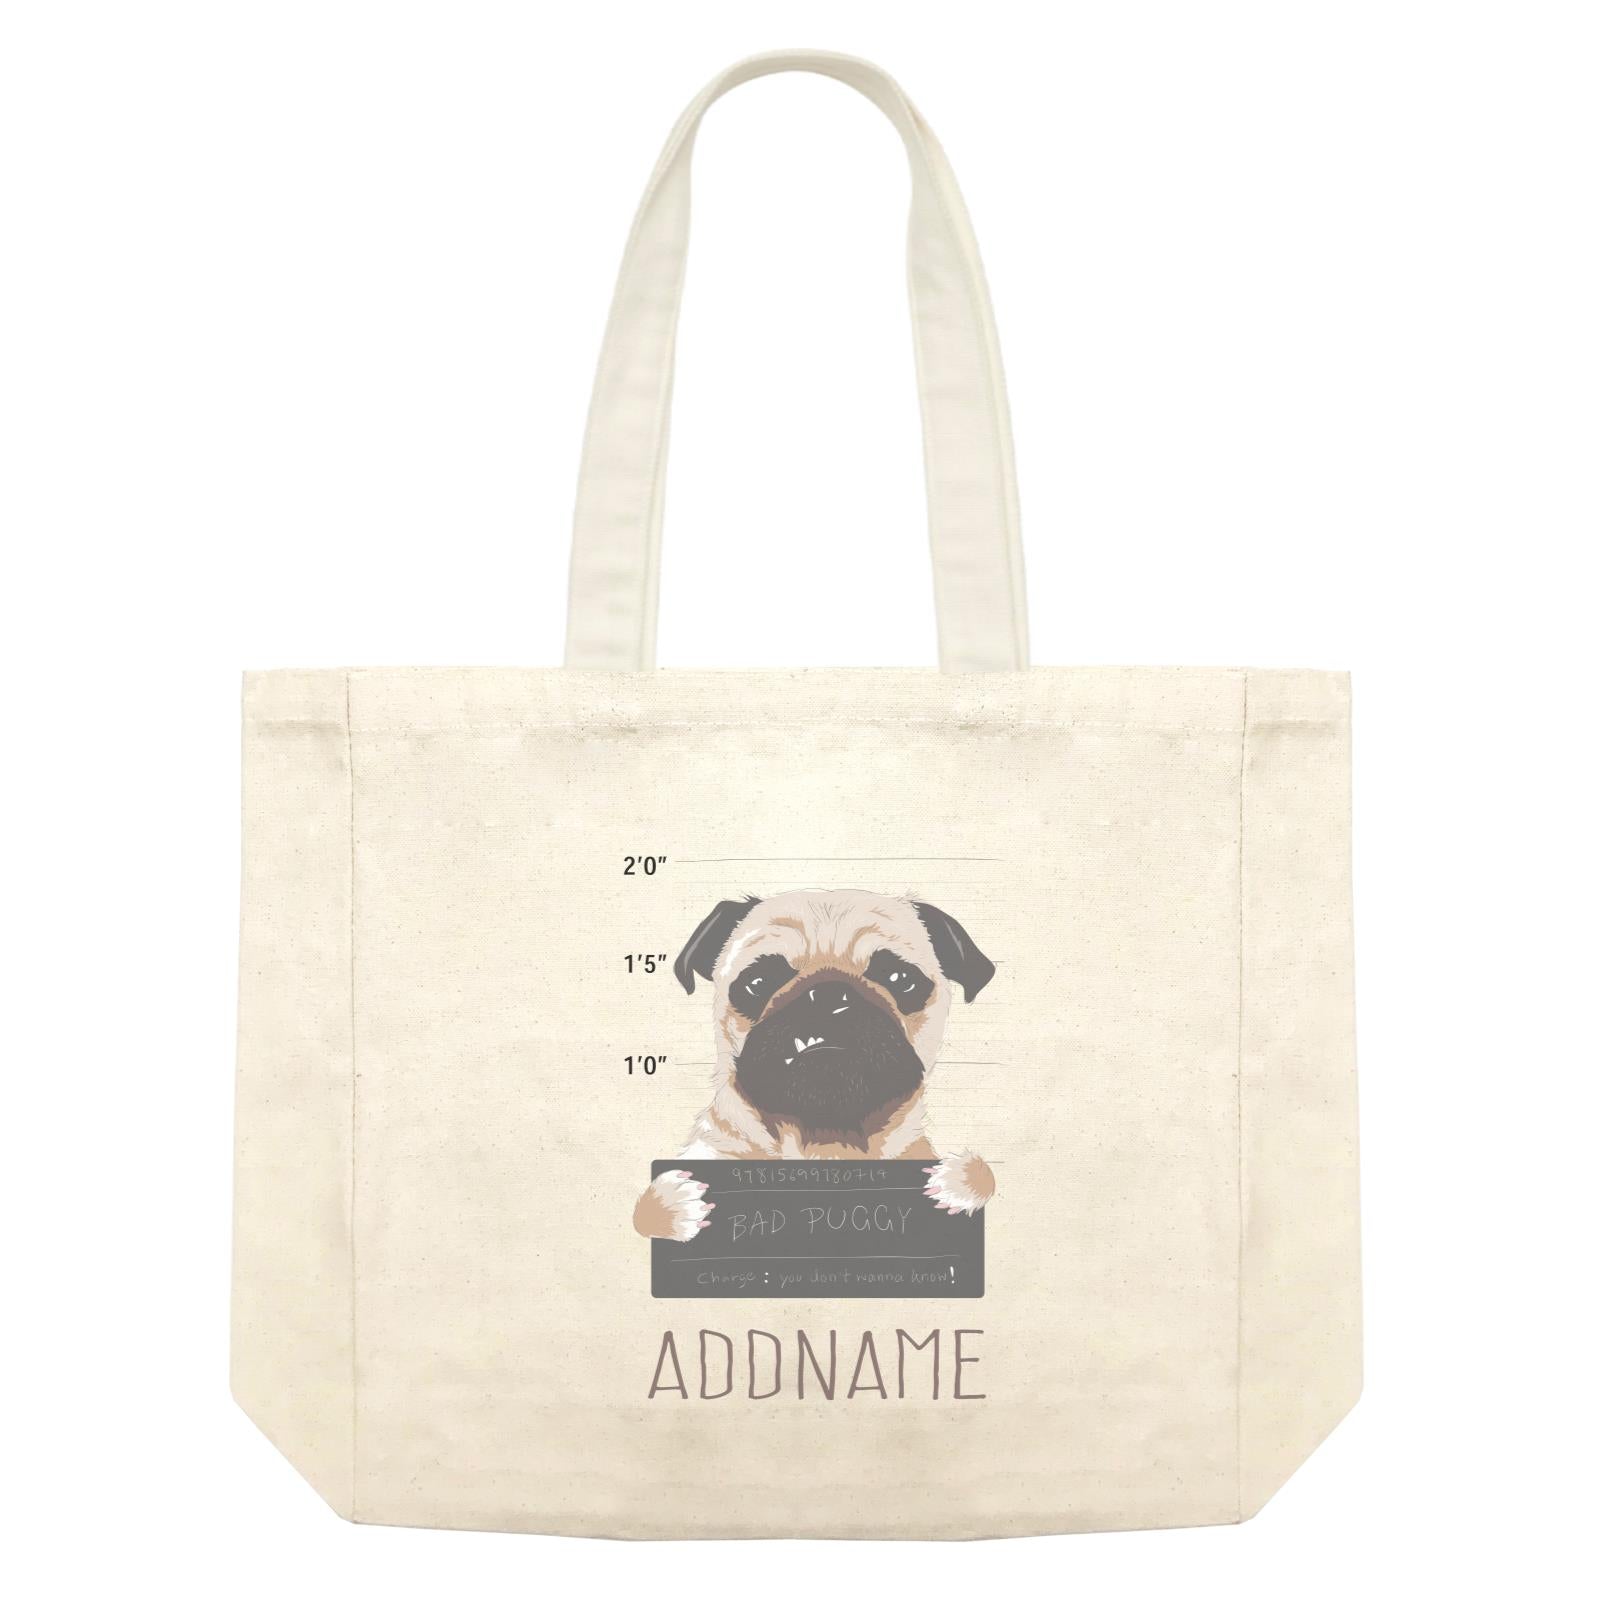 Funny Hand Drawn Animals Bad Puggy Charge You Don't Wanna Know With Addname Shopping Bag